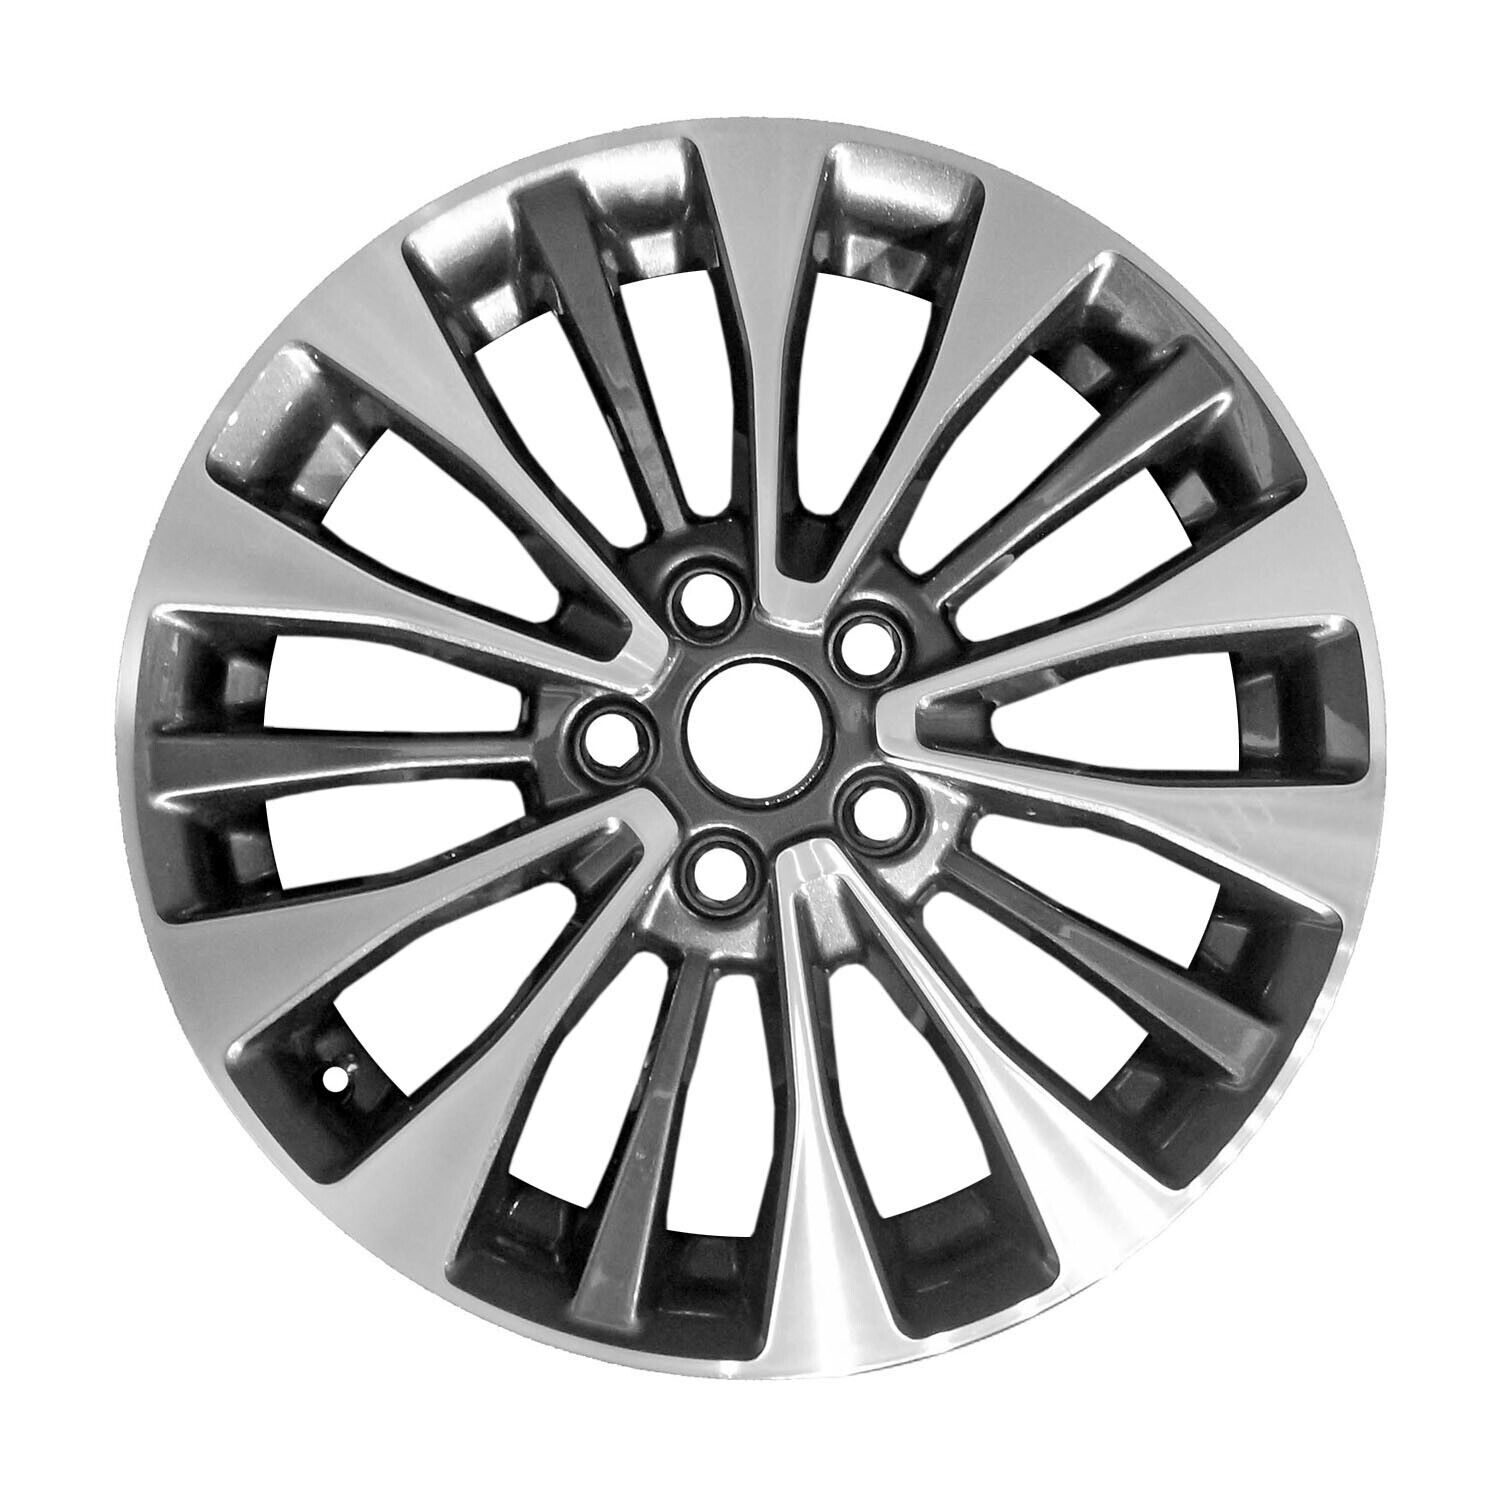 10105 Reconditioned OEM Aluminum Wheel 17x7 fits 2017-2018 C-Max Painted Silver